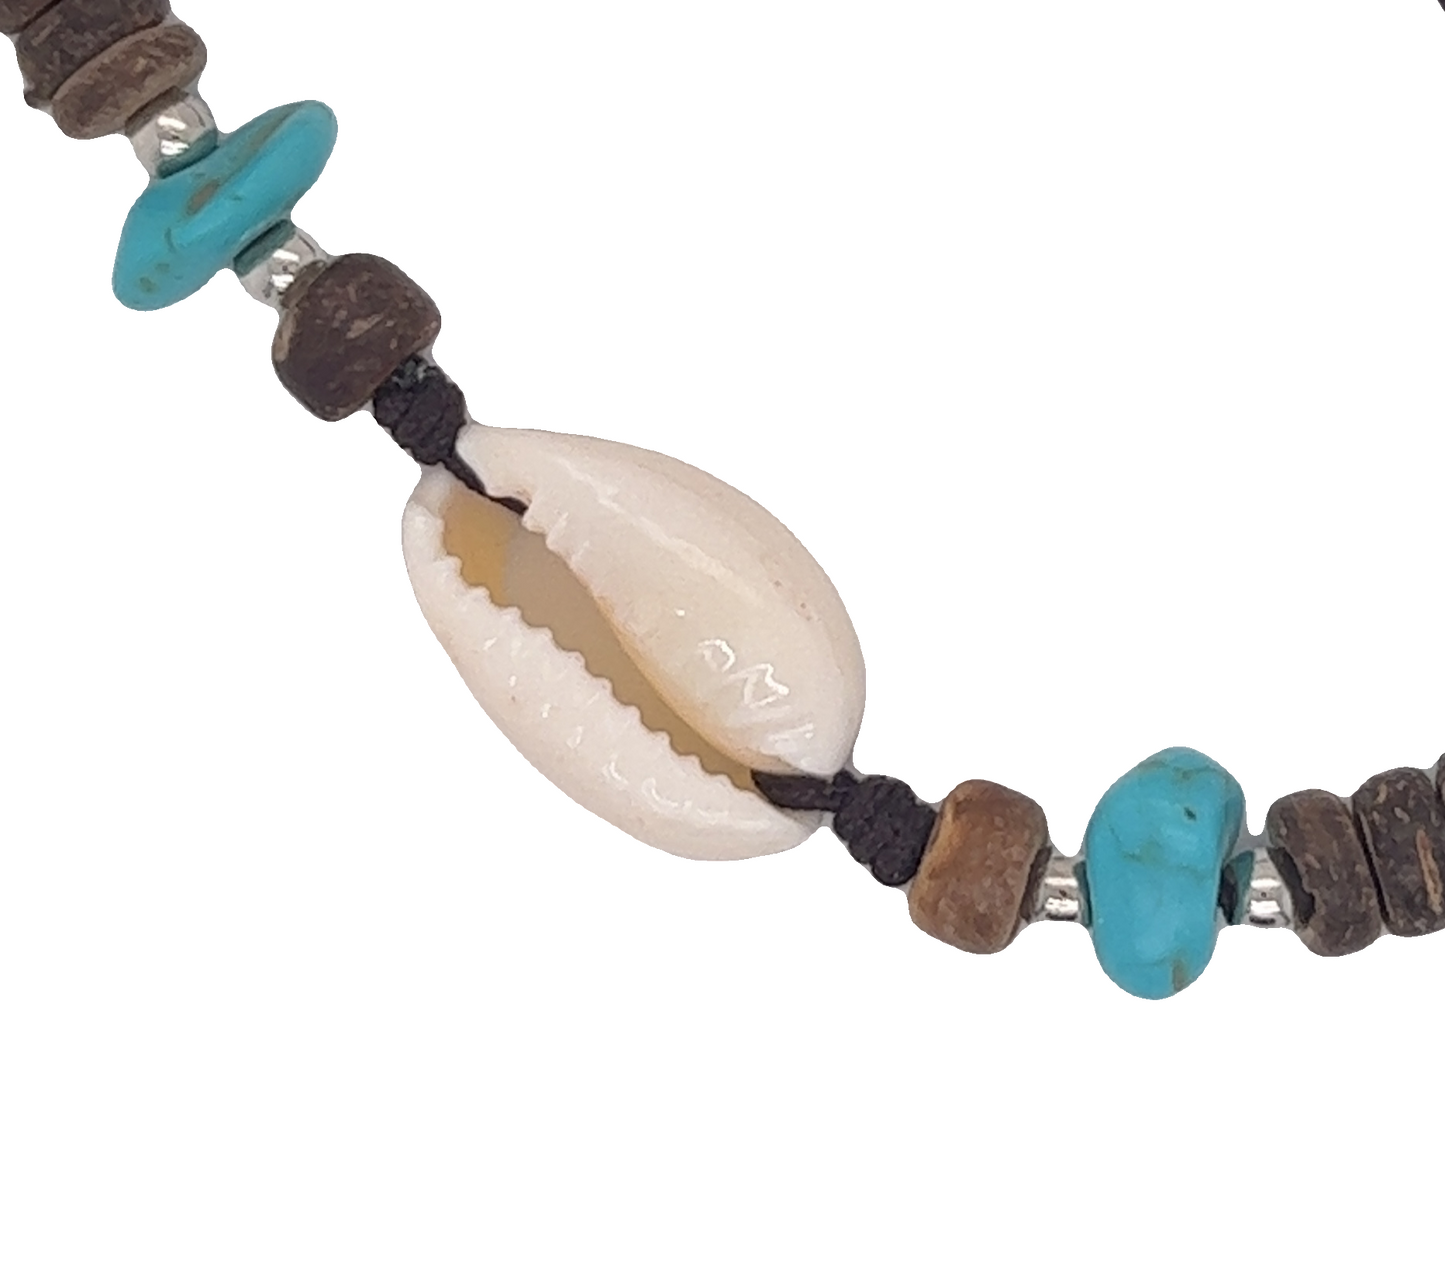 A stretchable band Cowrie Shell Beaded Bracelet with turquoise beads and wooden beads by Super Silver.